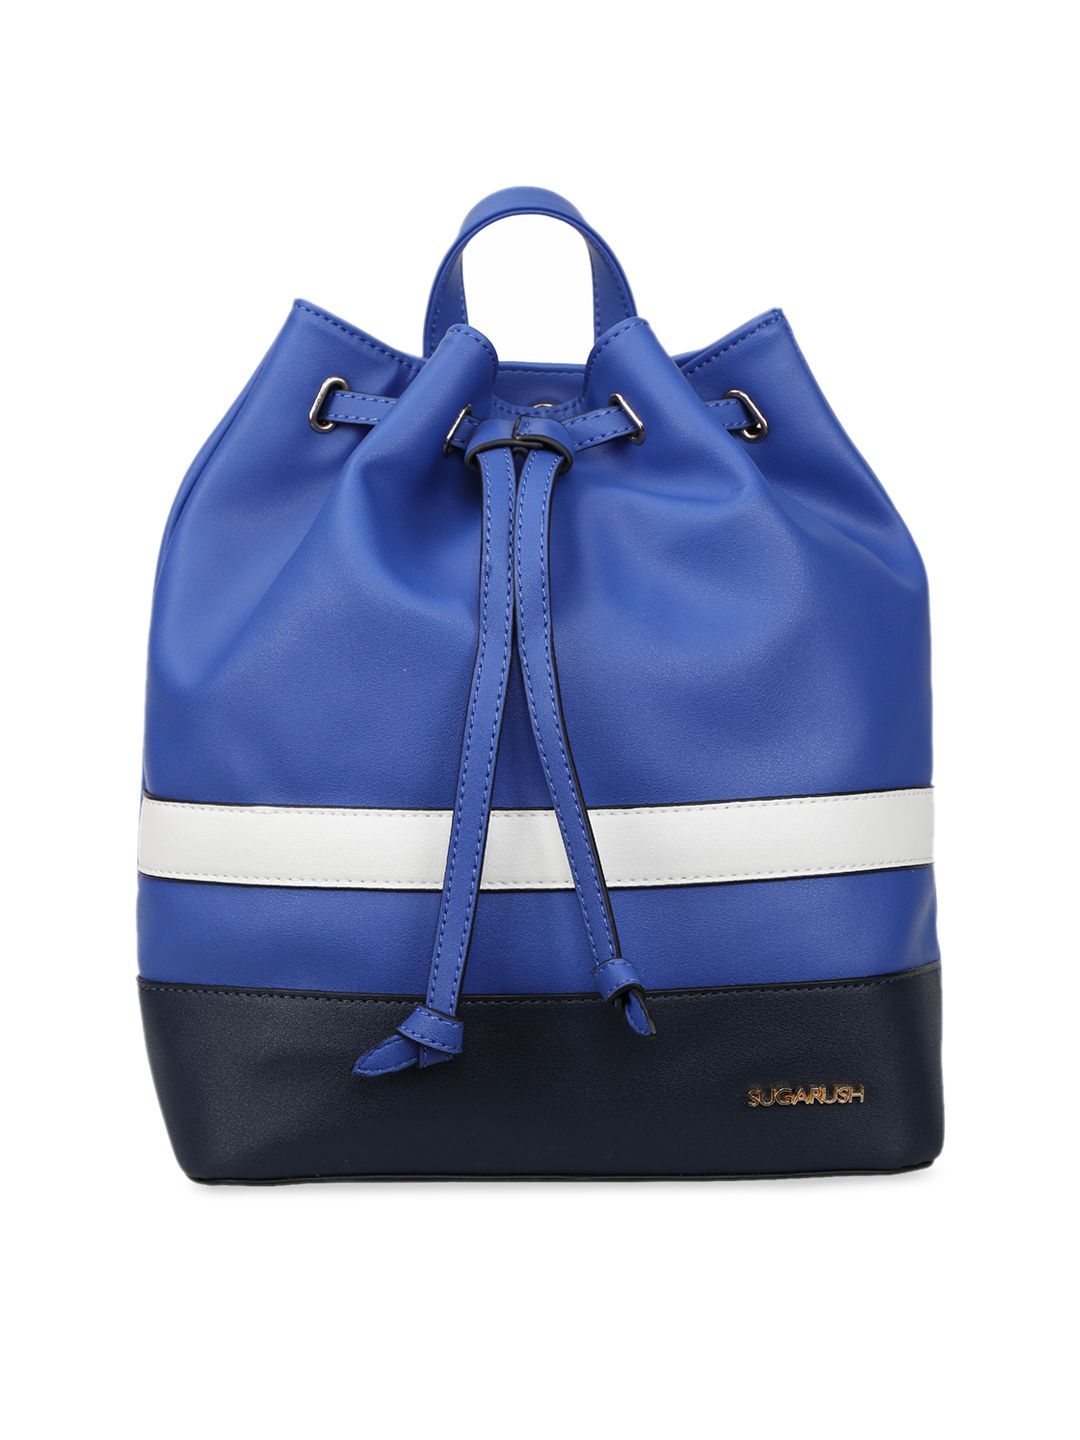 Sugarush Women Blue & White Striped Backpack Price in India